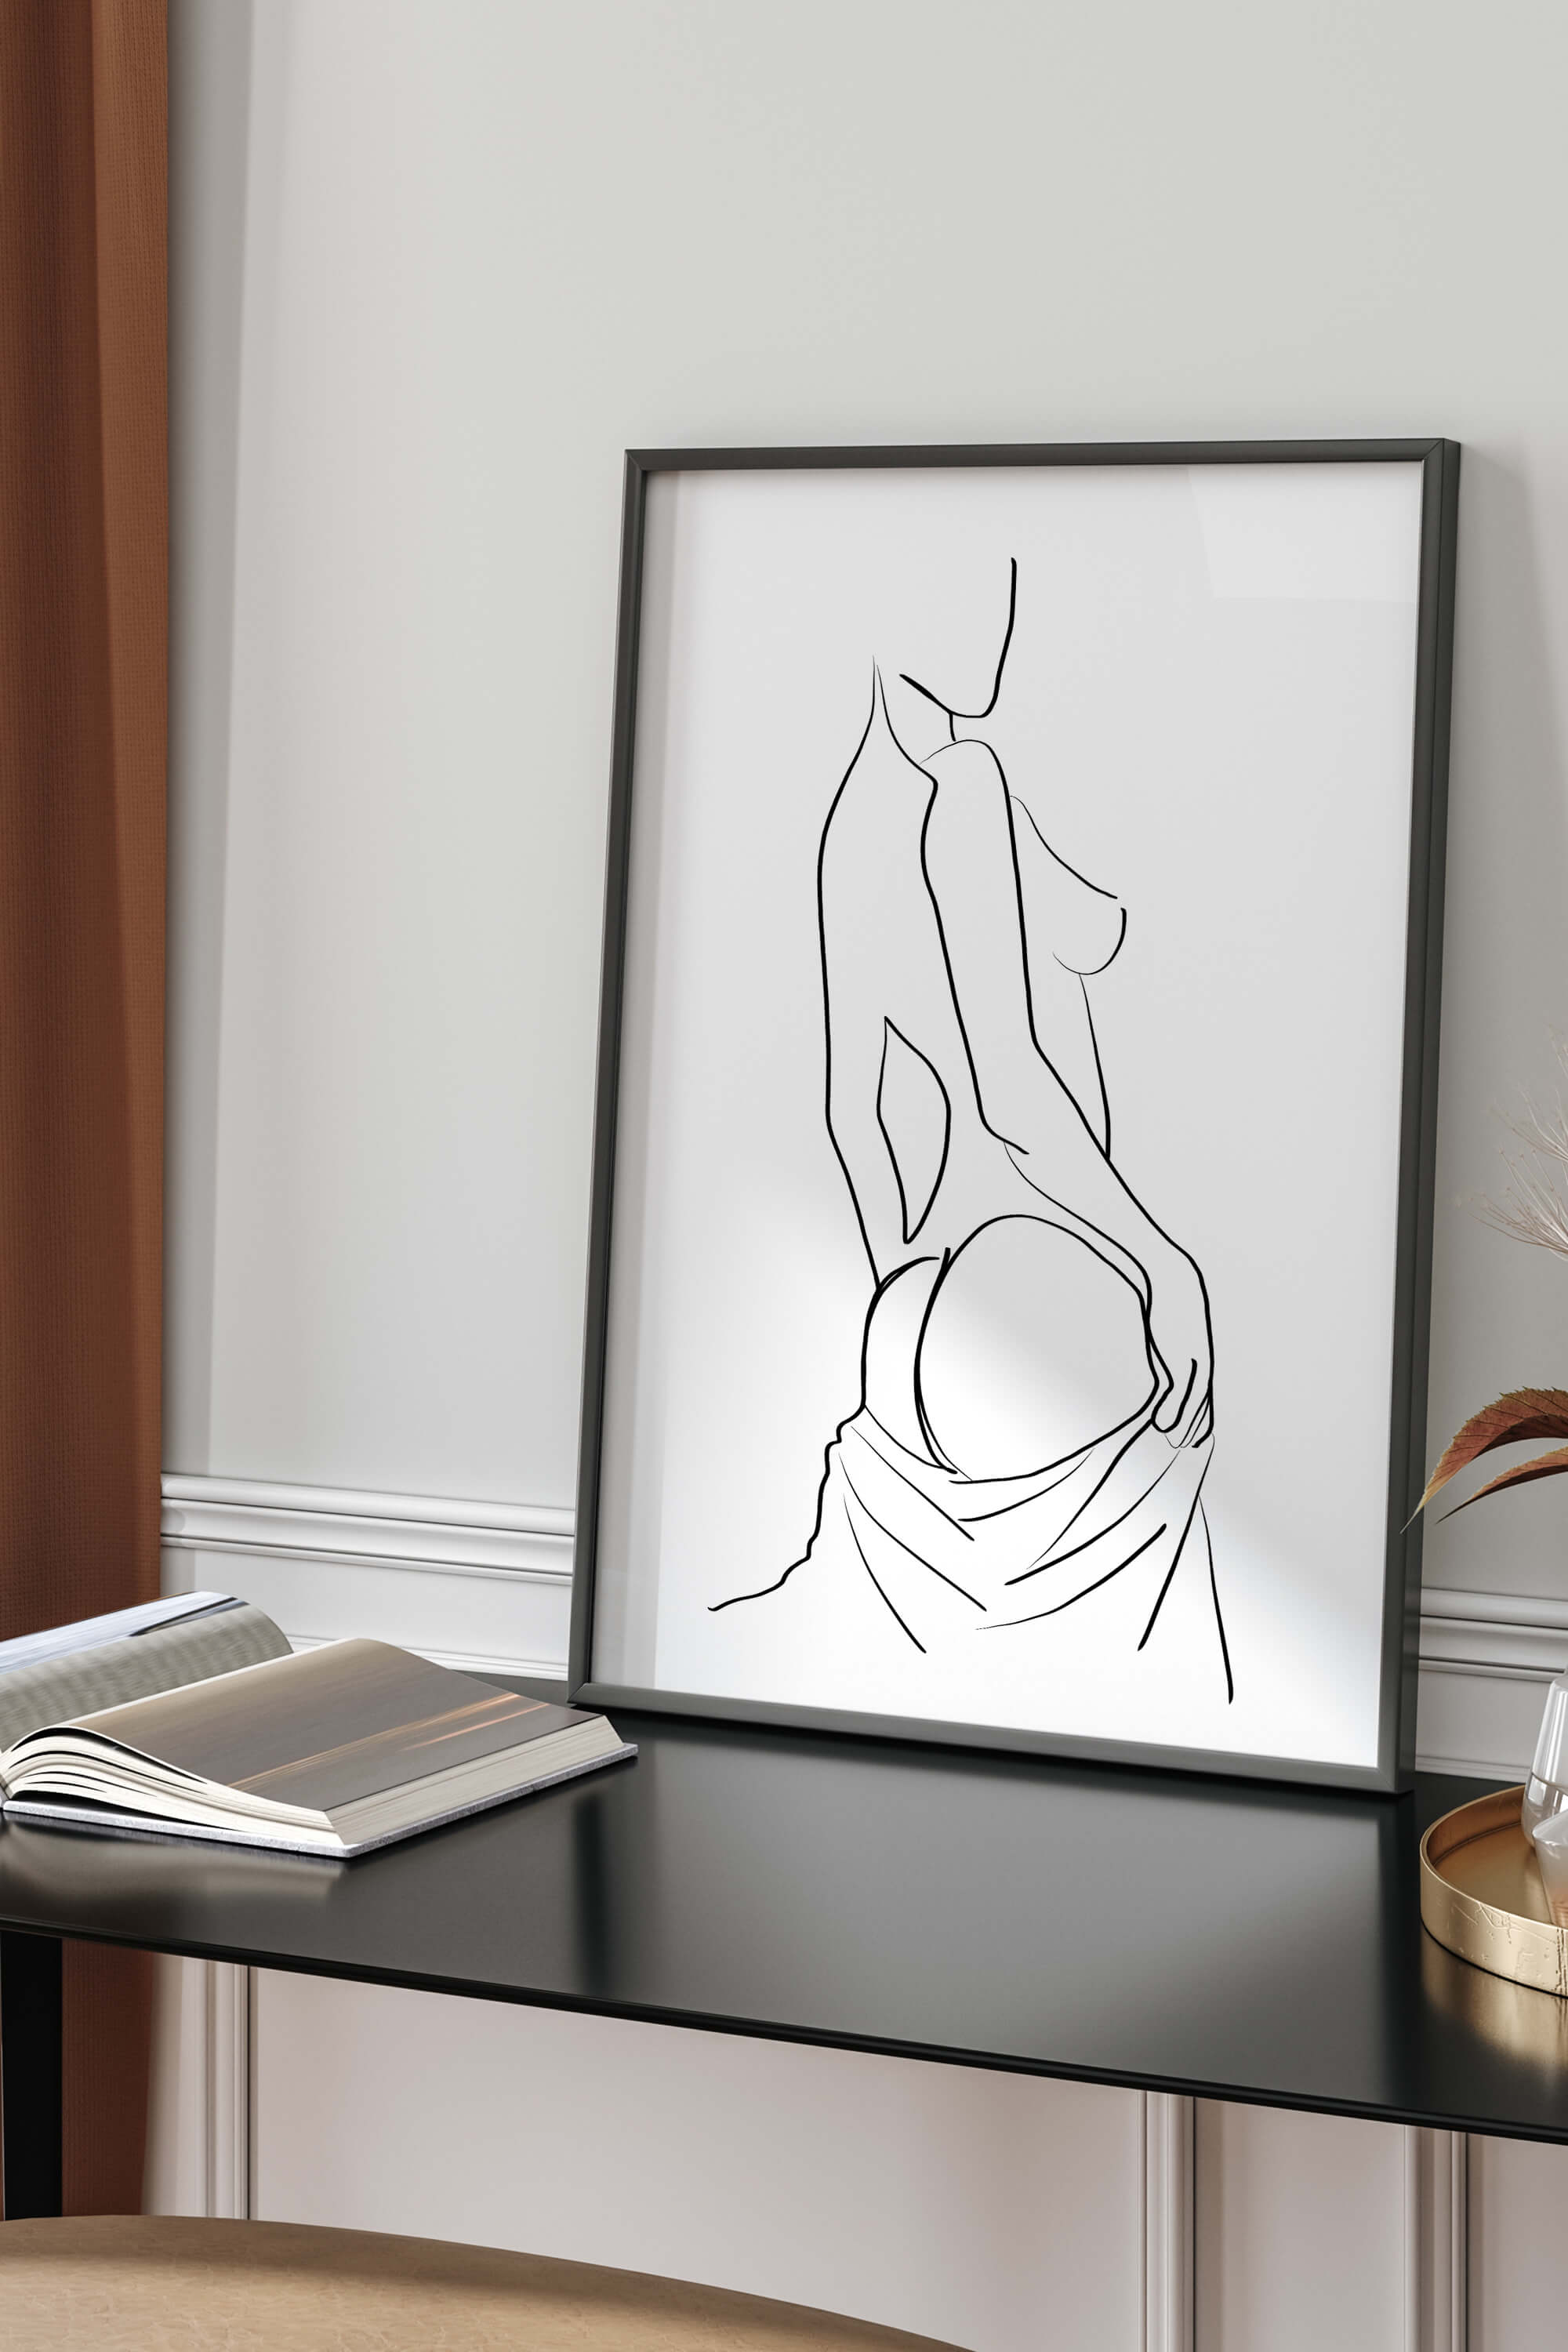 Embark on an intimate journey with this line art depicting the sensual beauty of a woman's back. The carefully rendered details and nuanced shading make it a striking piece, offering a touch of elegance to your space.